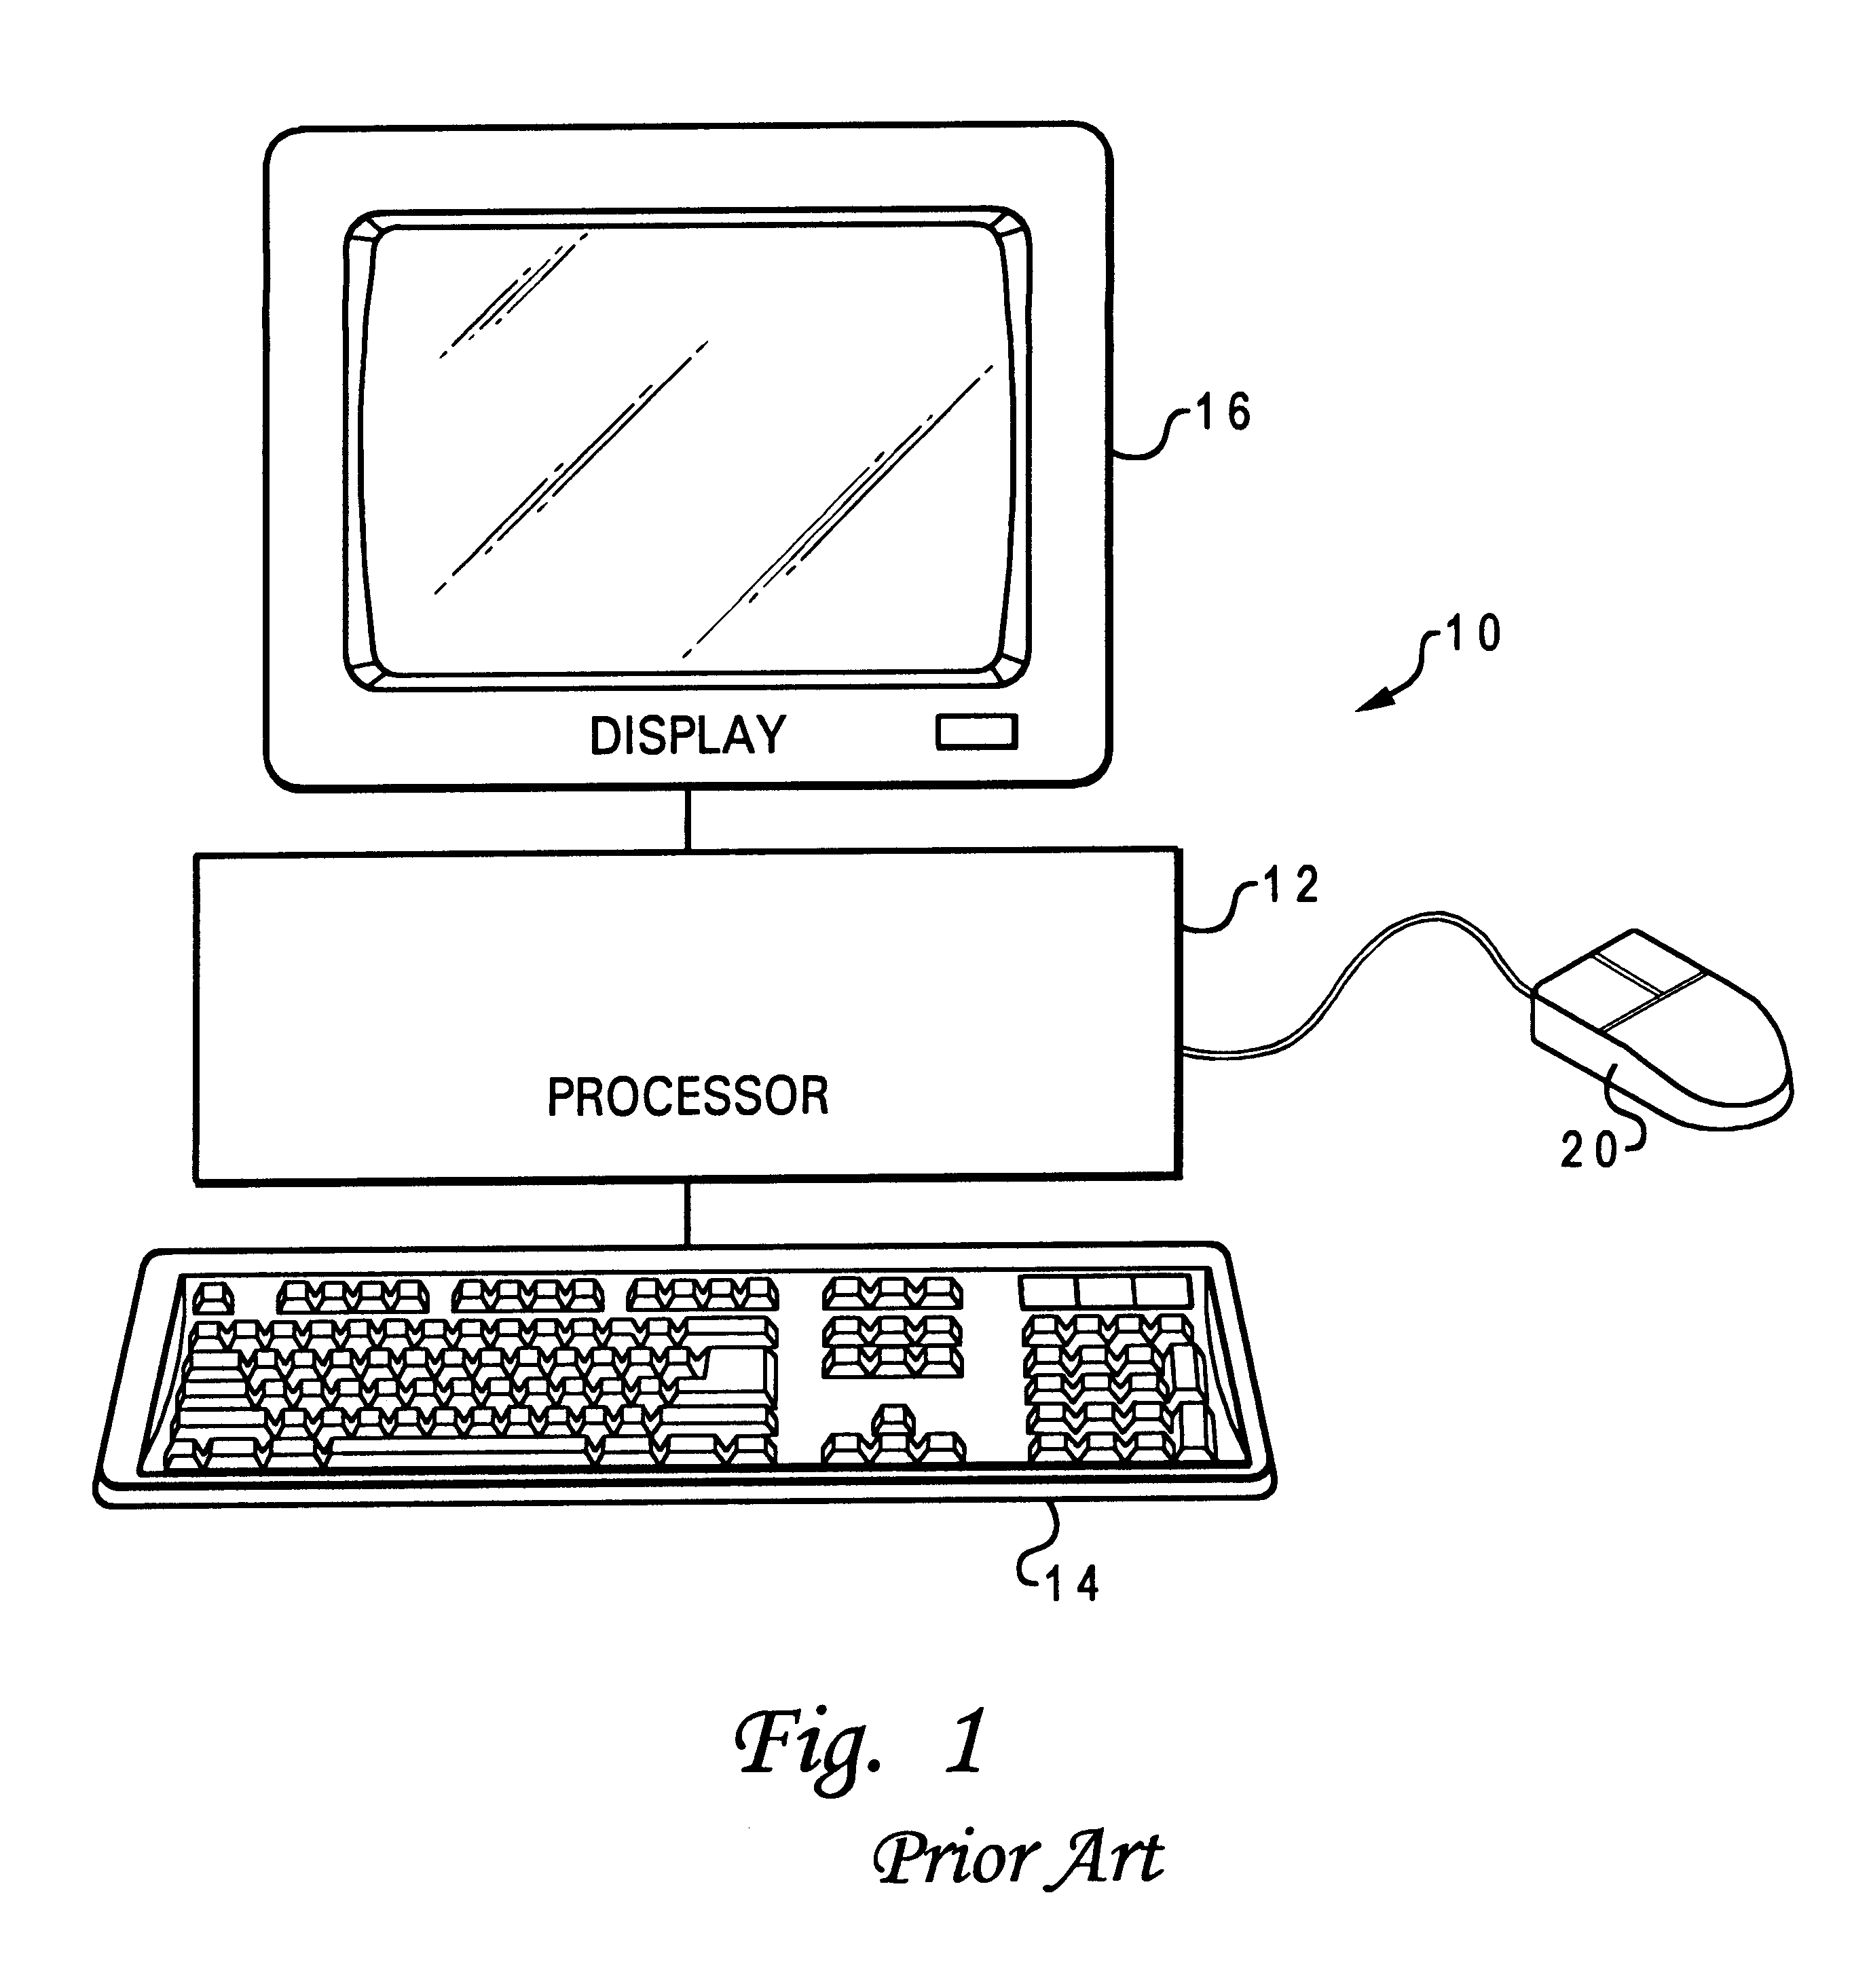 Method for extracting hyperlinks from a display document and automatically retrieving and displaying multiple subordinate documents of the display document